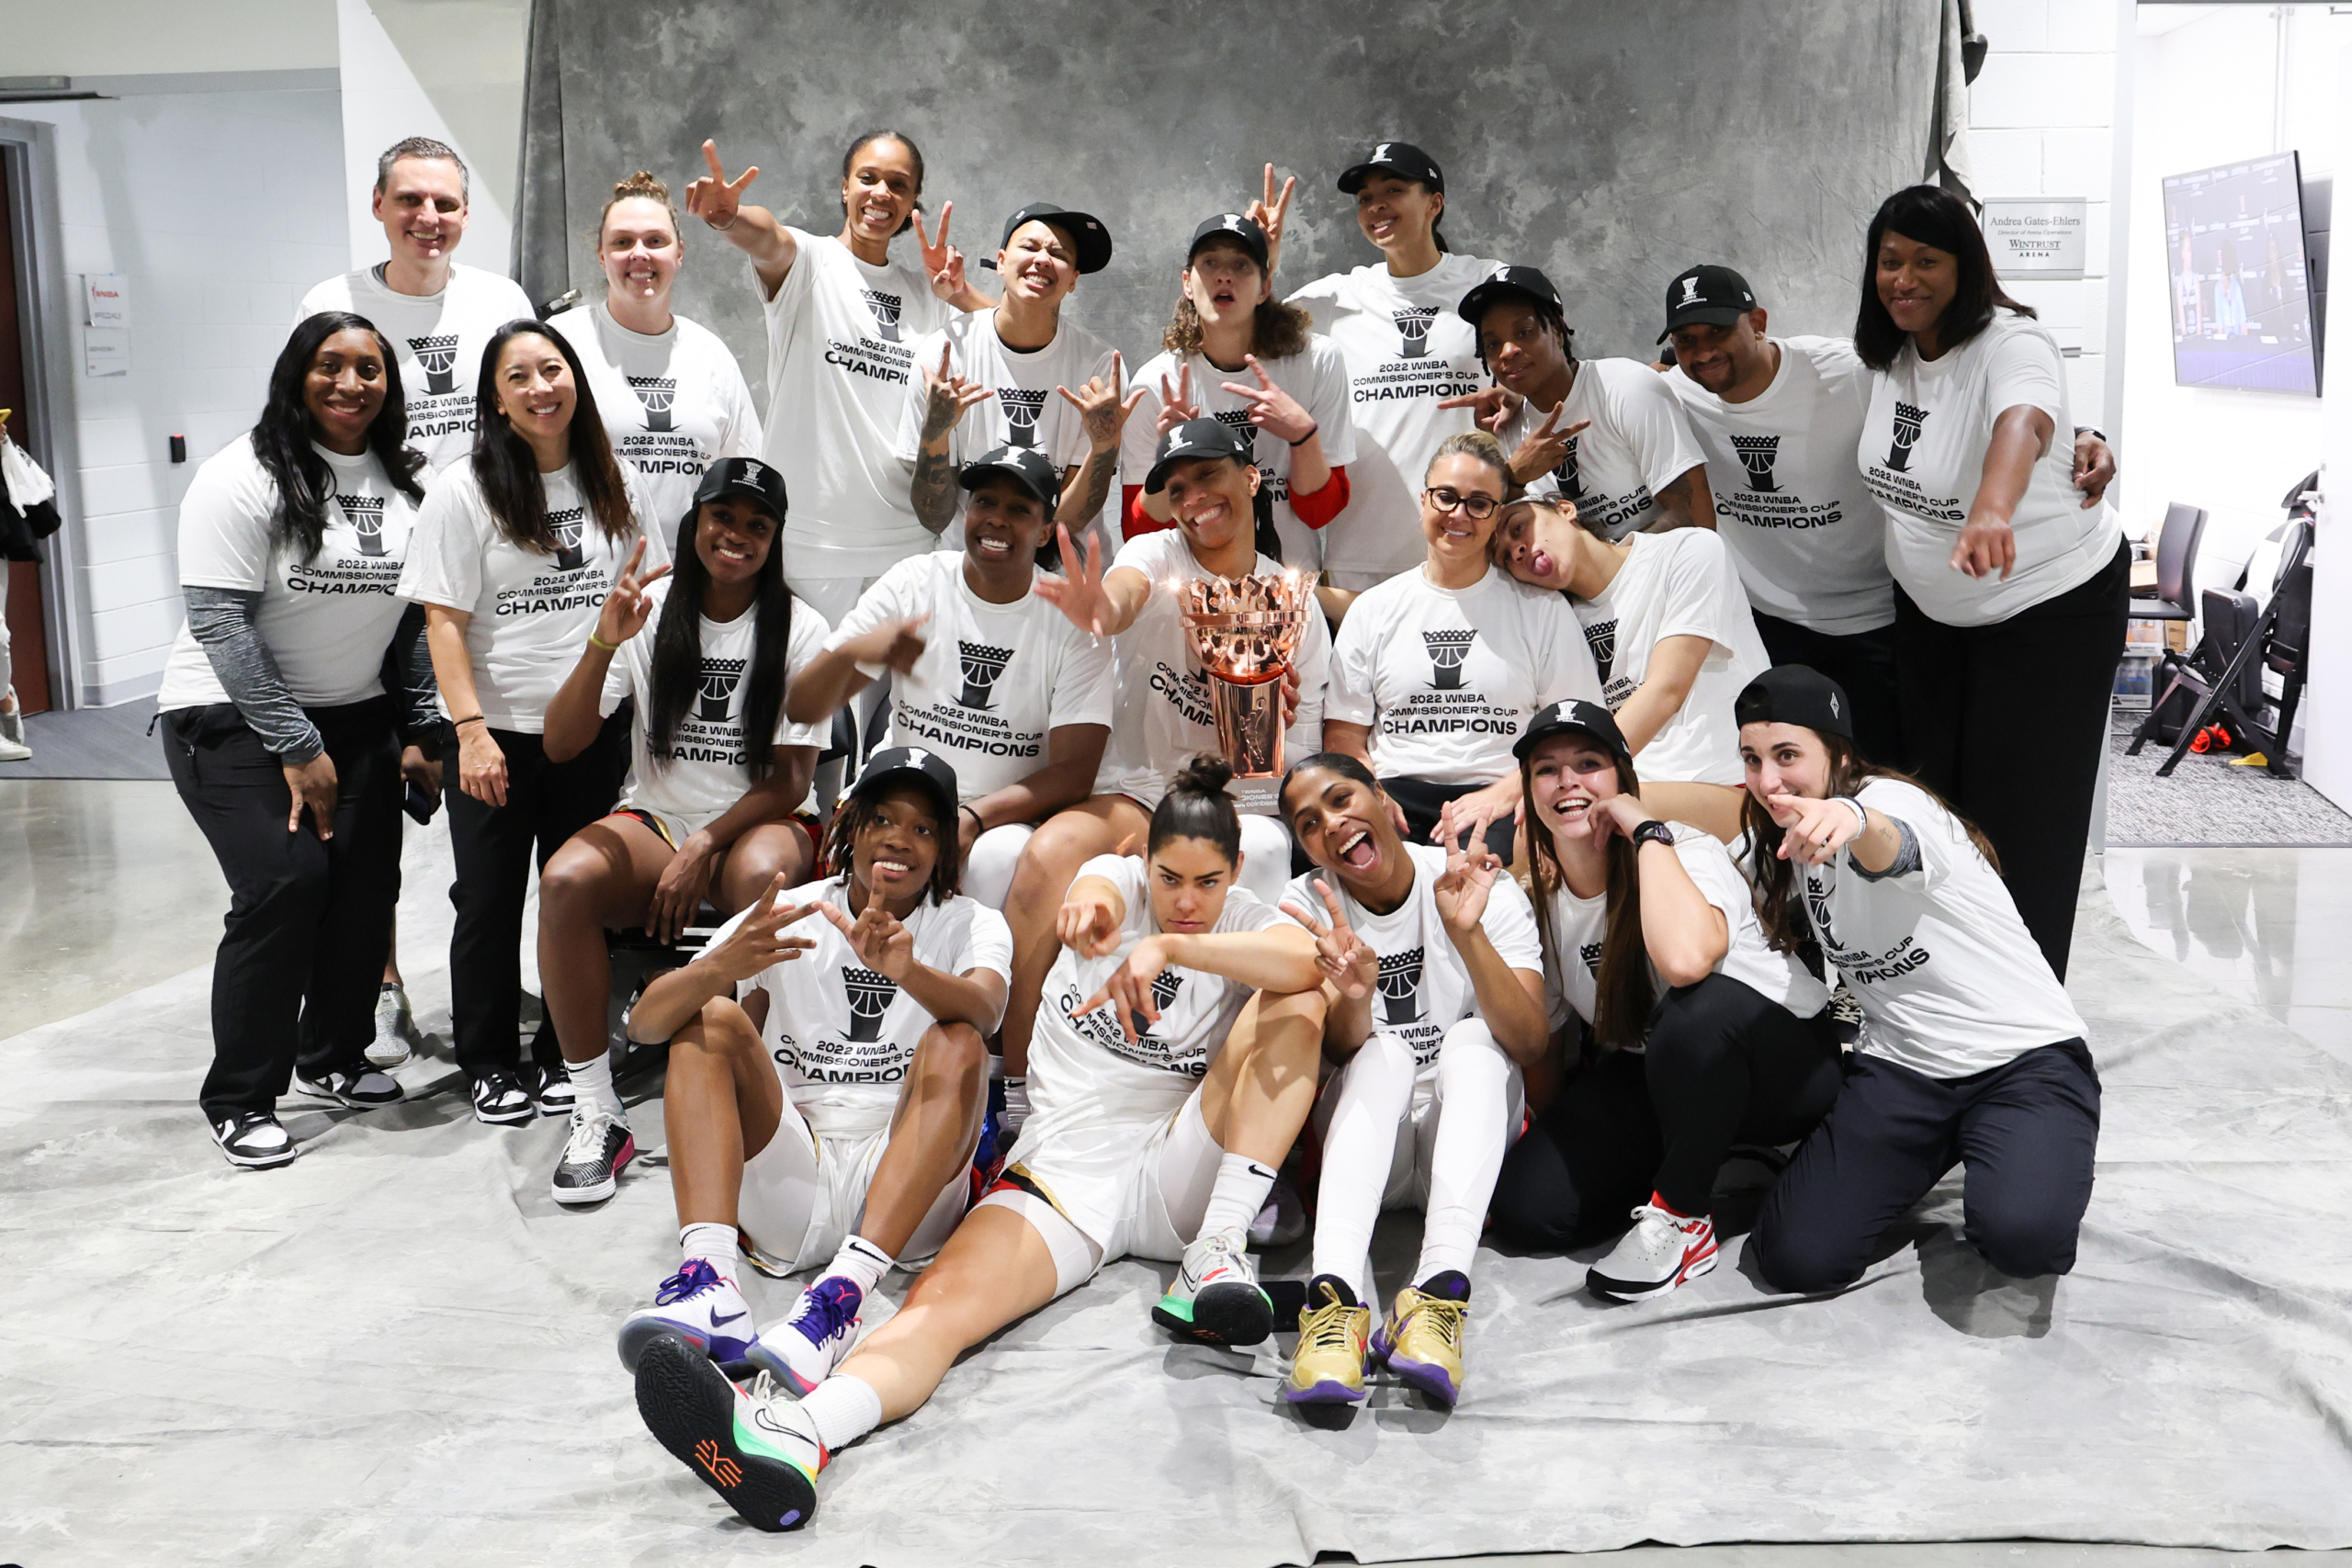 Las Vegas Aces Top Chicago Sky in Second Annual WNBA Commissioner’s Cup